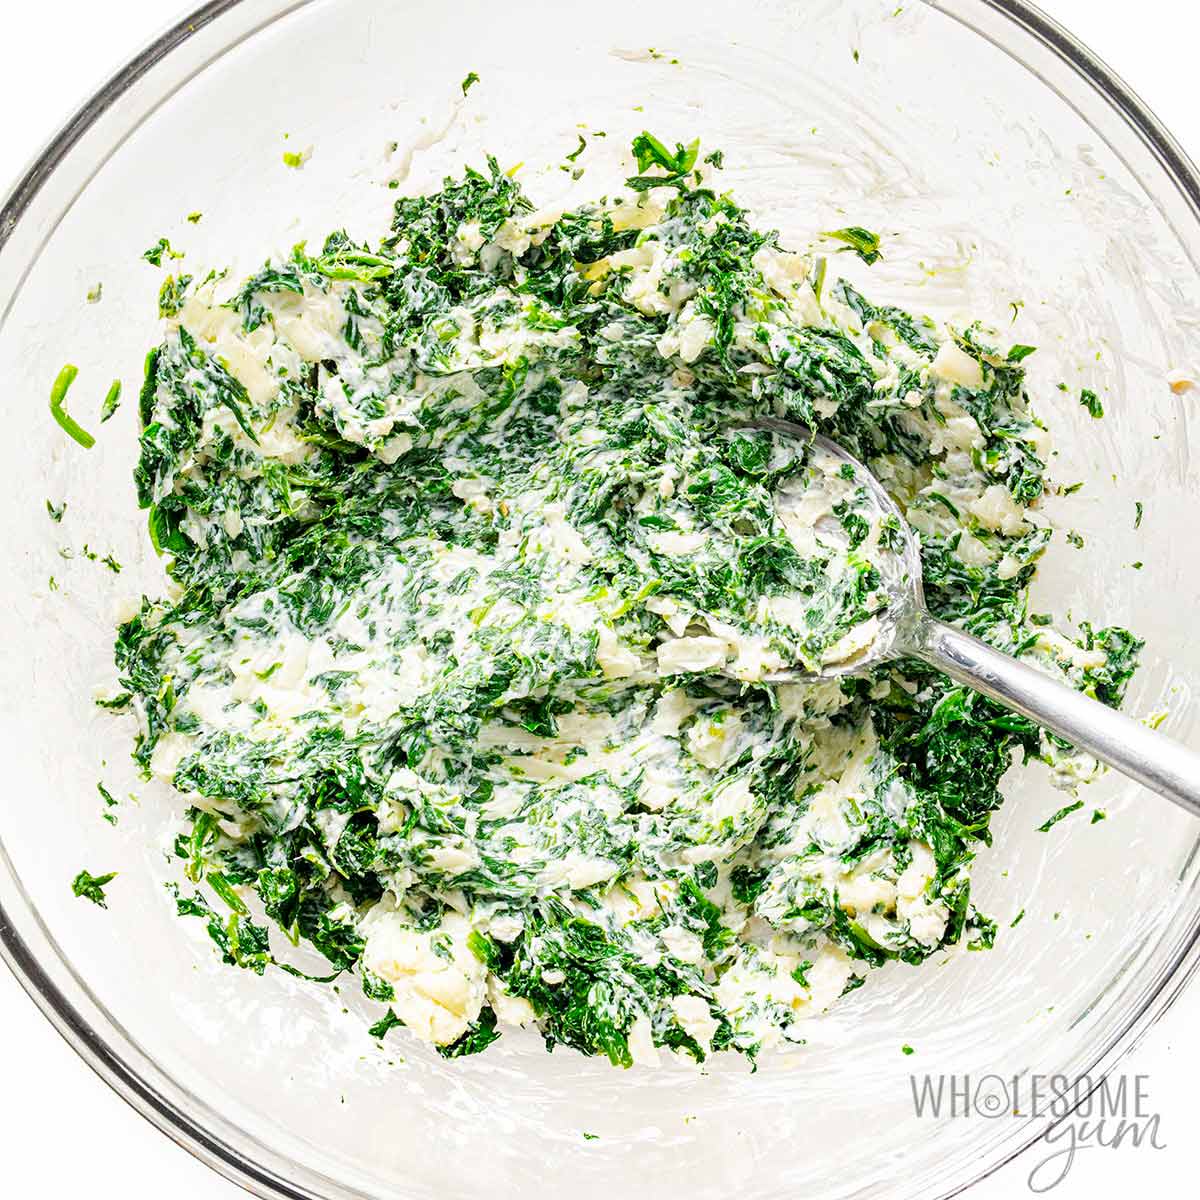 Spinach mixed into cheese mixture in a bowl.